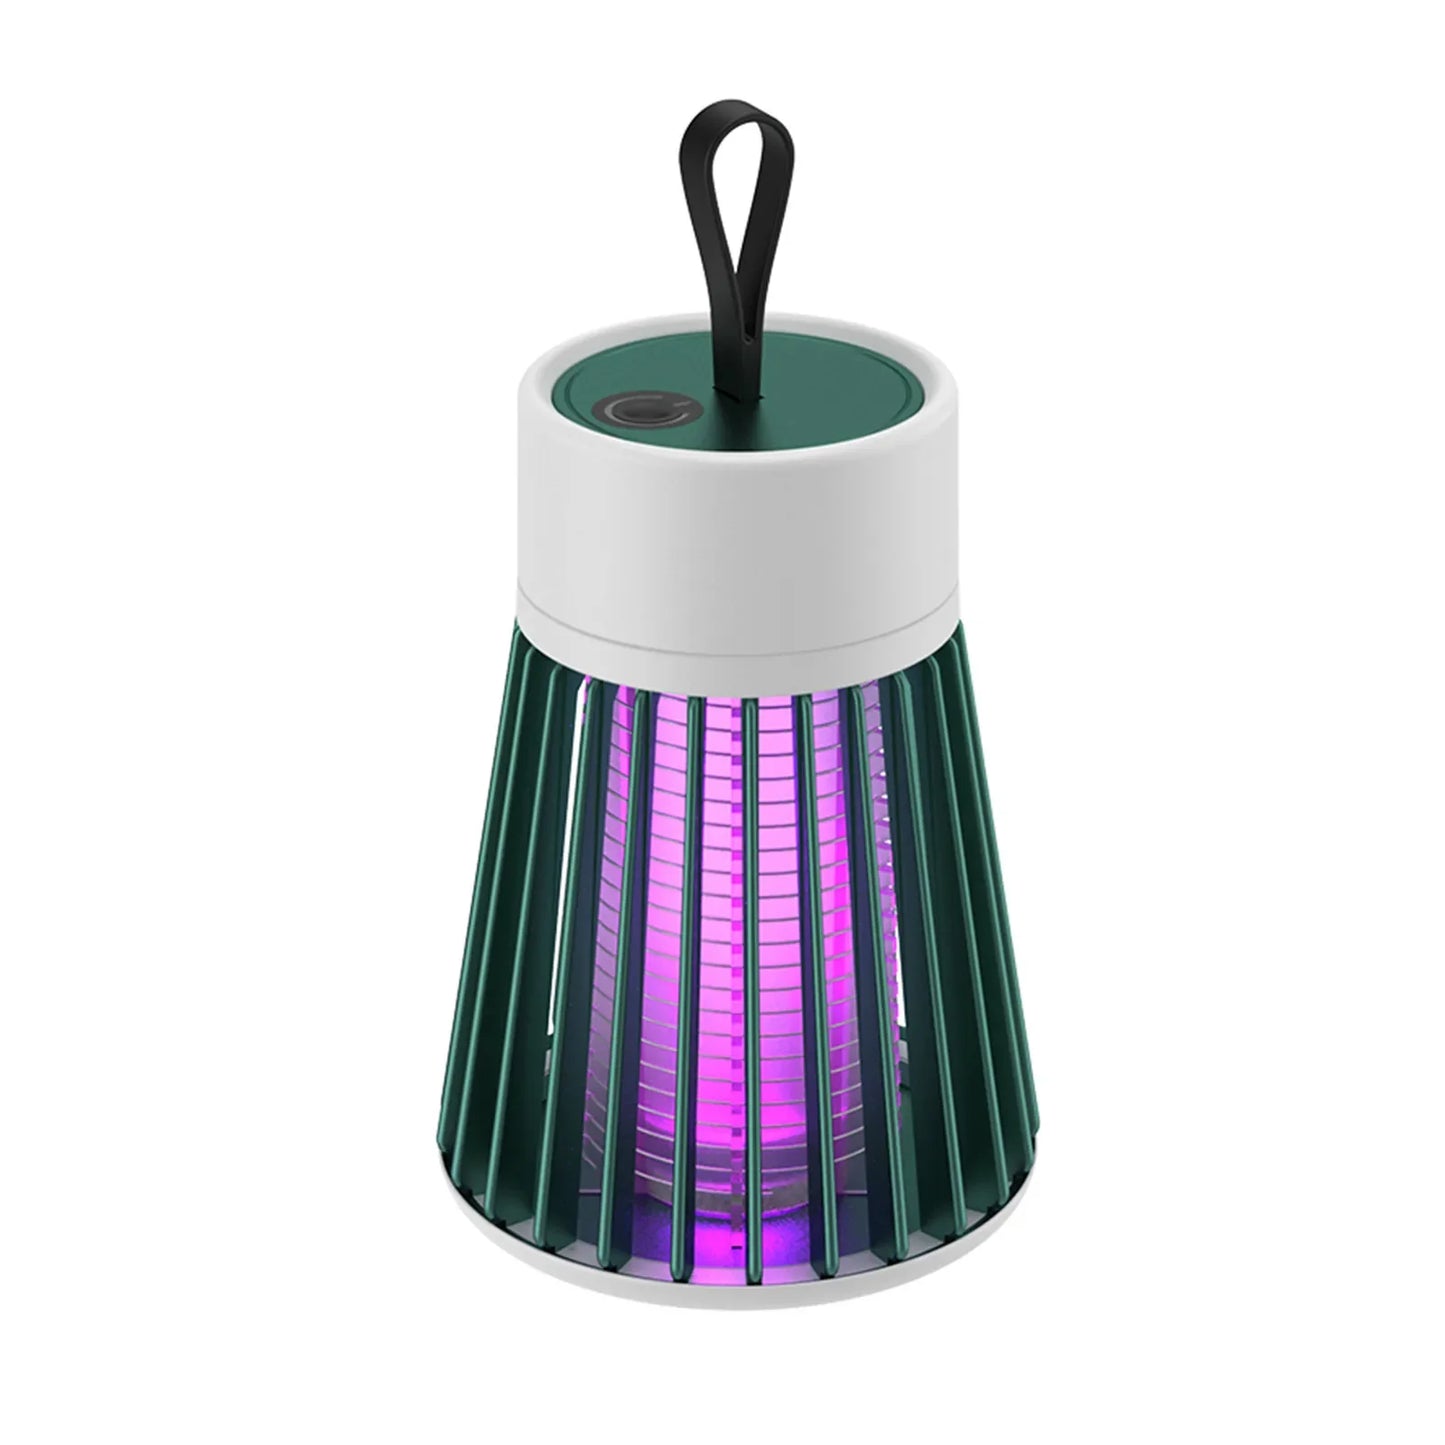 MosquitoAway Silent LED Trap